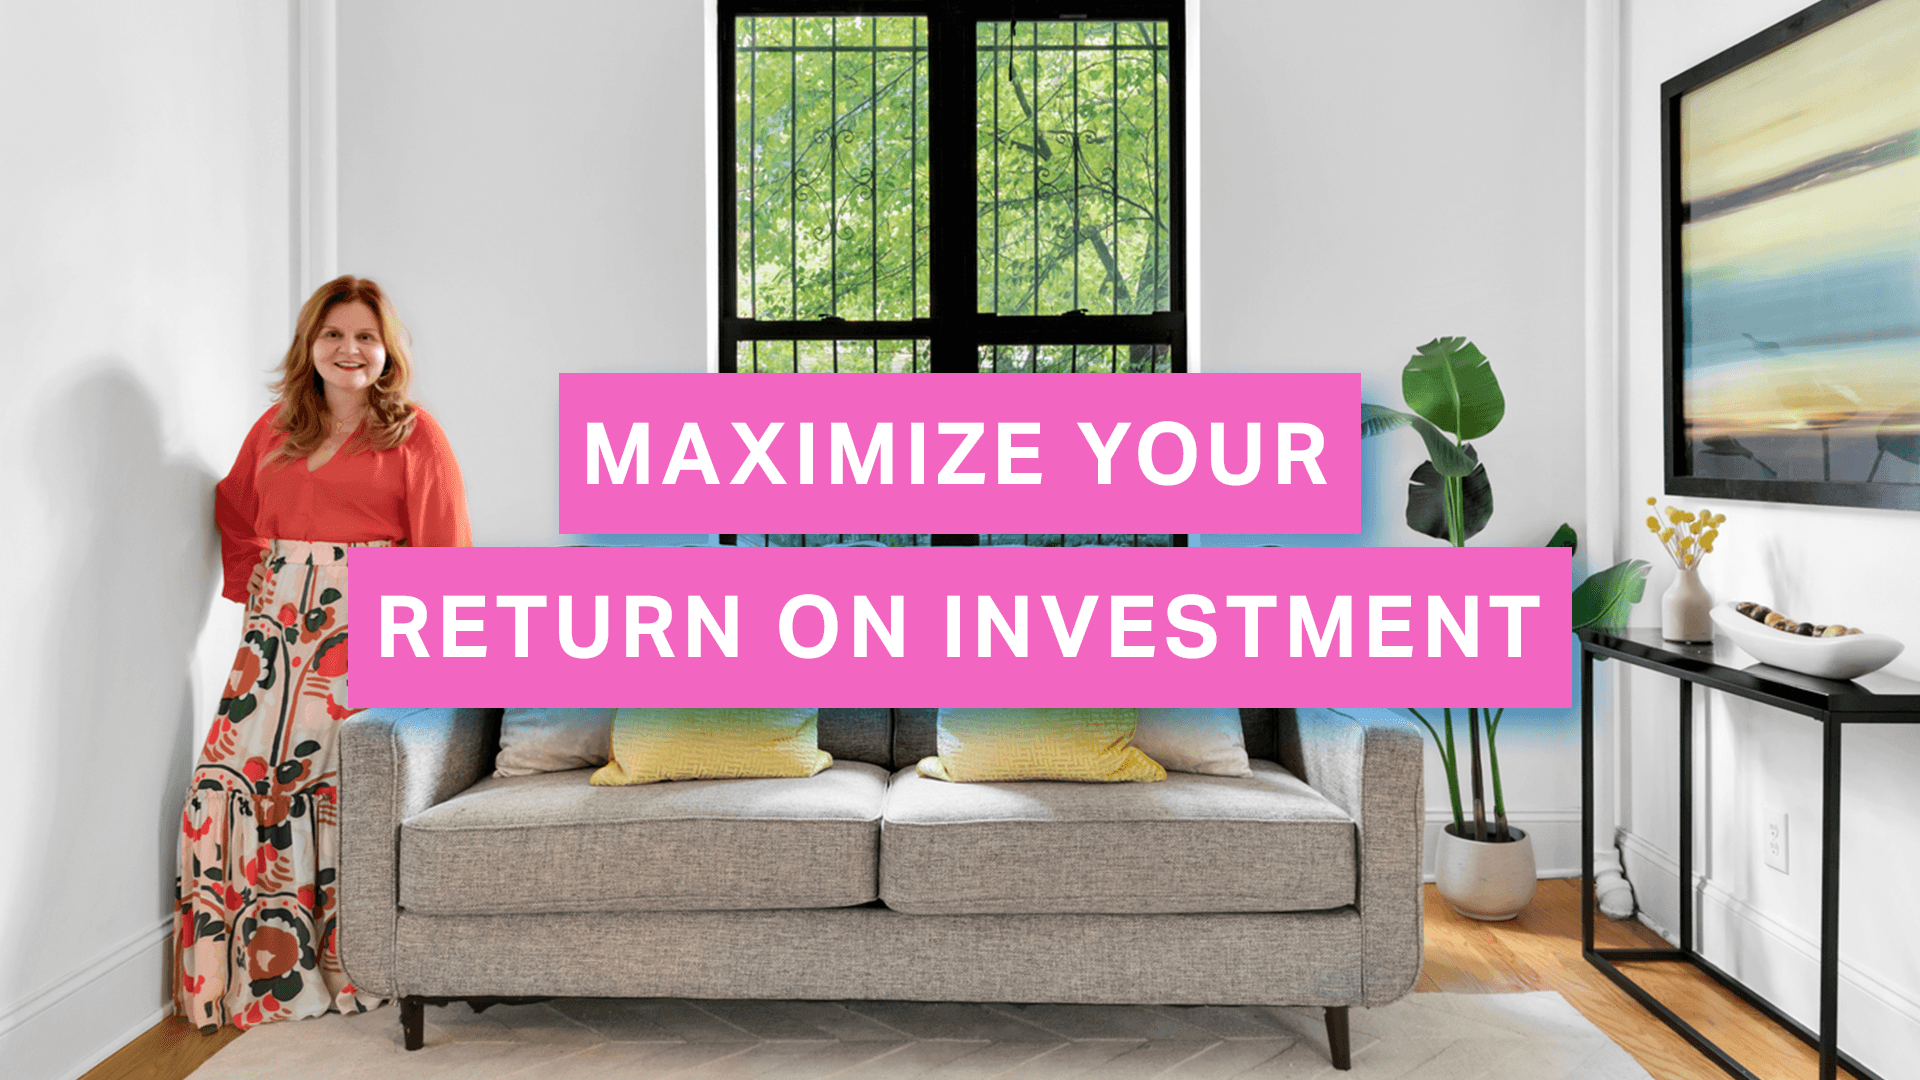 A Change of A Dress - Maximize Your Return on Investment